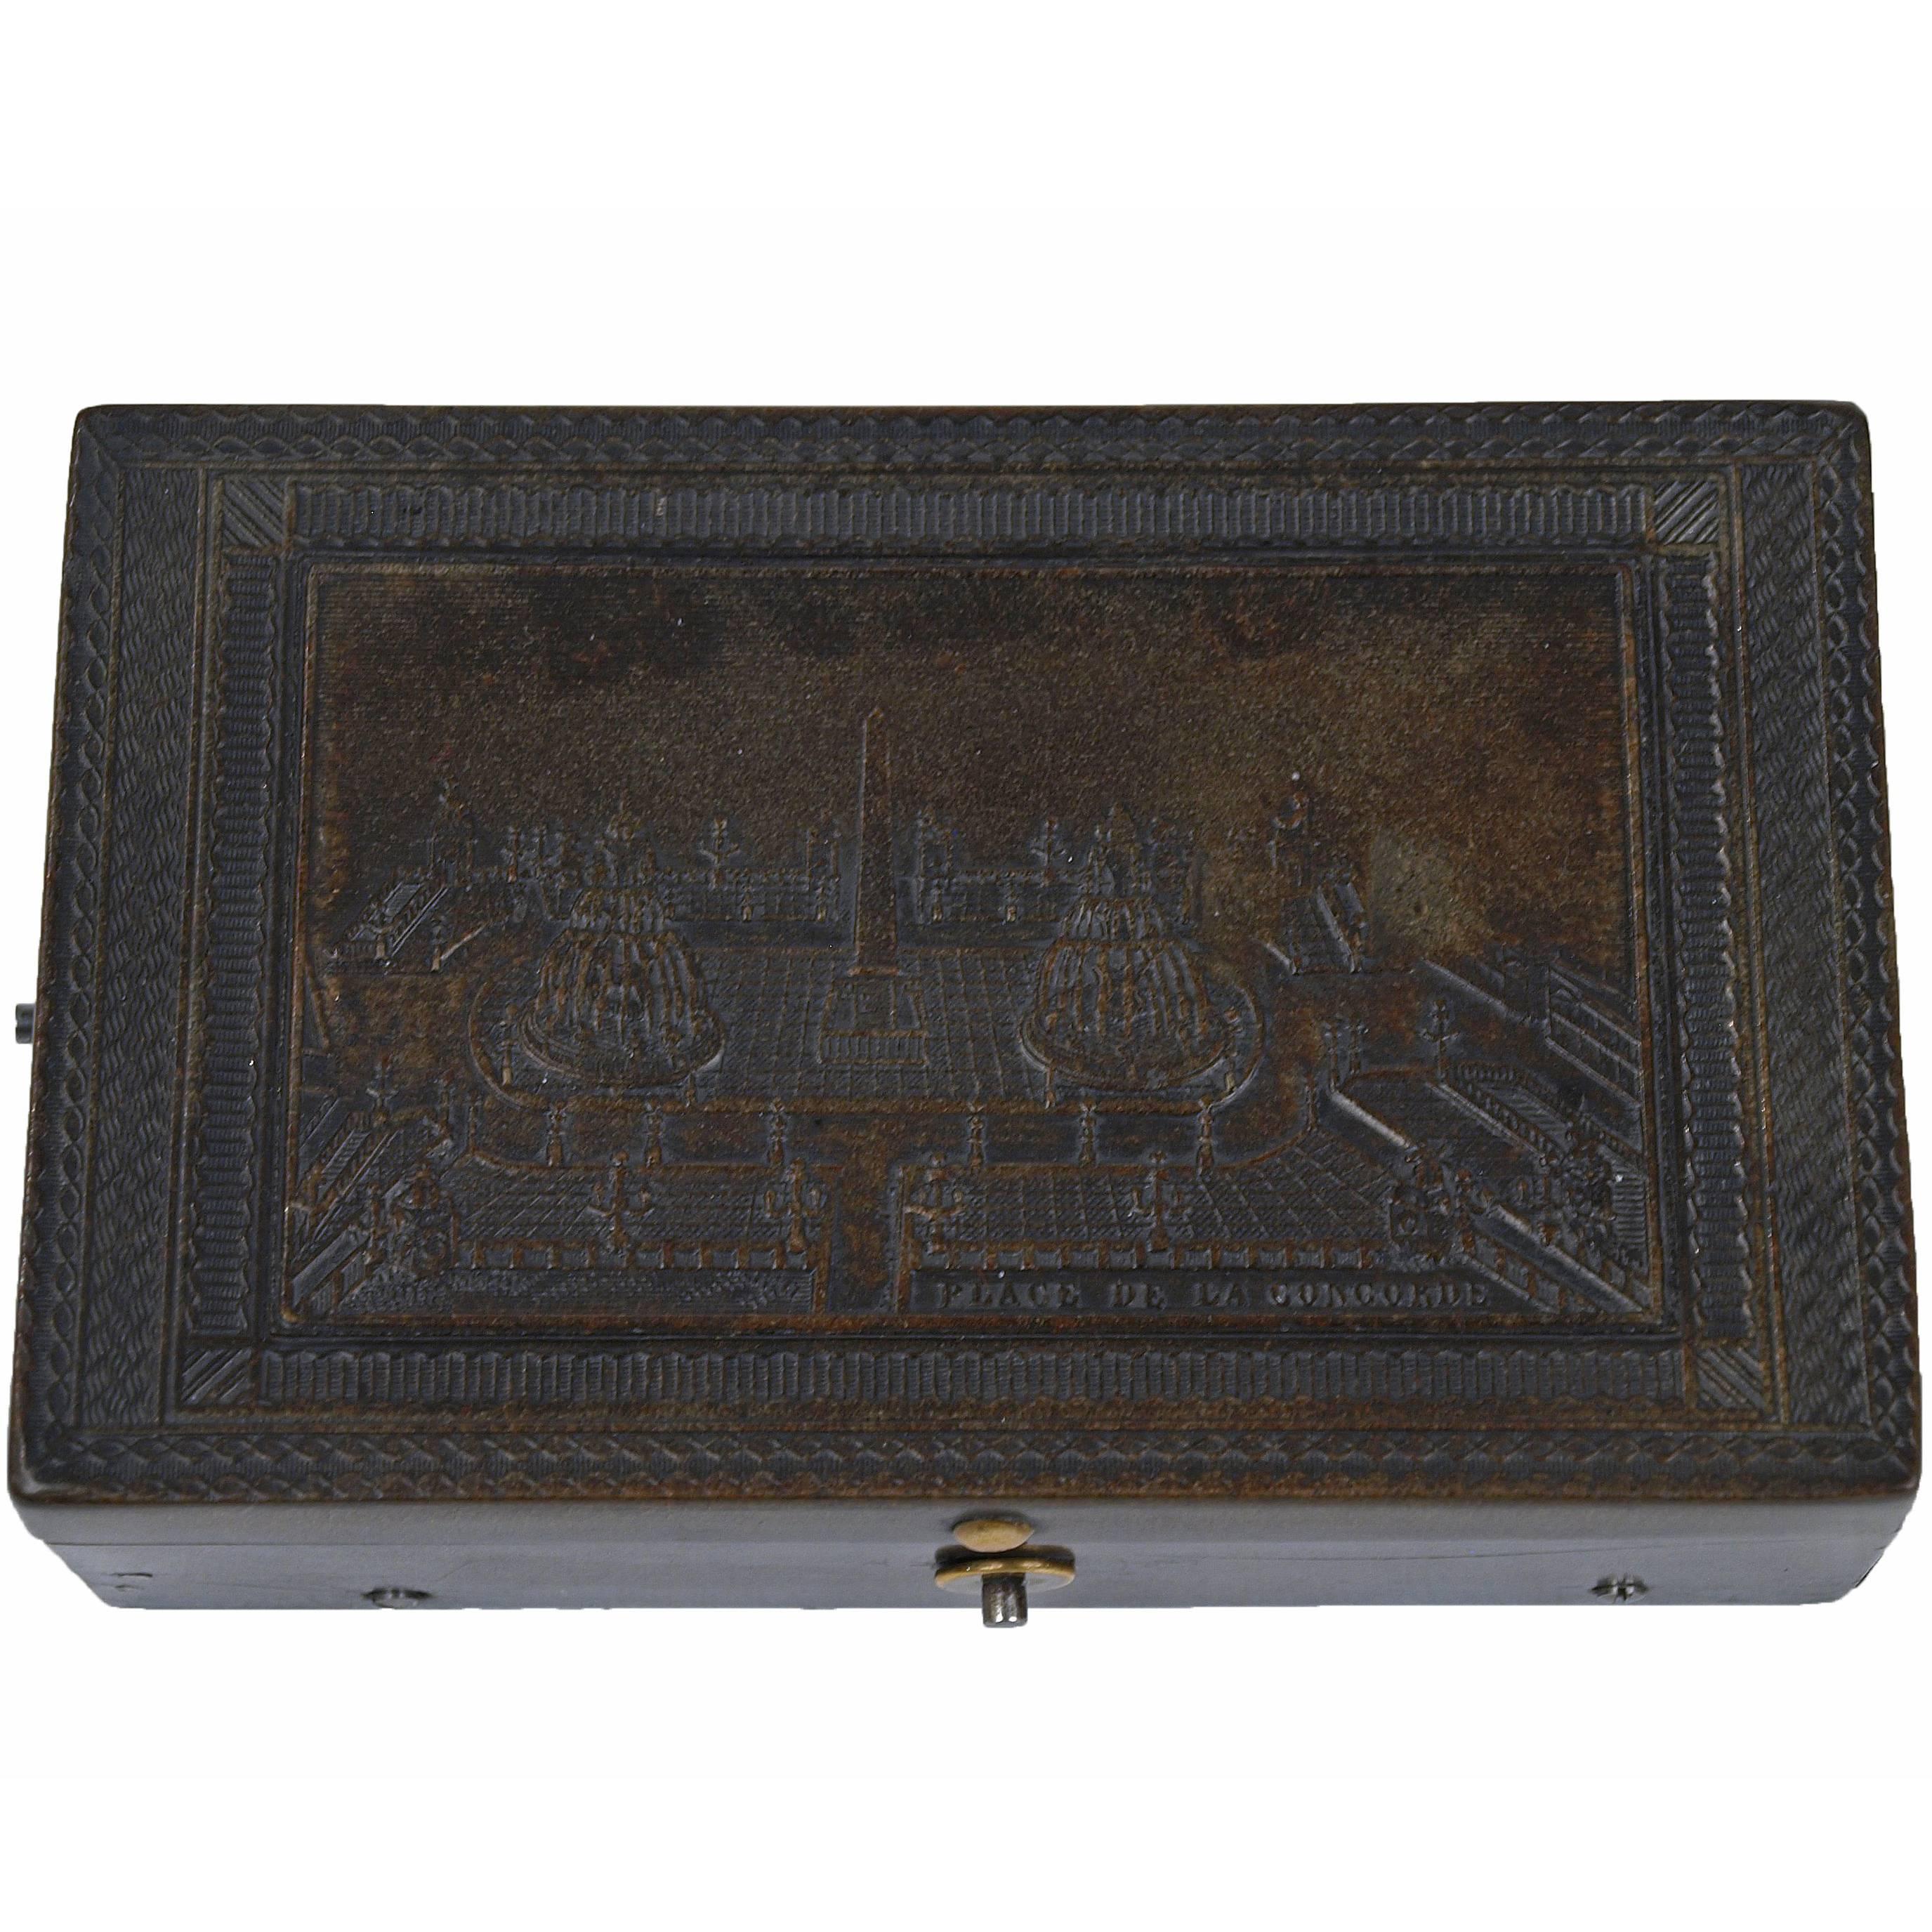 Engraved Tortoiseshell Music Box with French Revolutionary Inscription For Sale